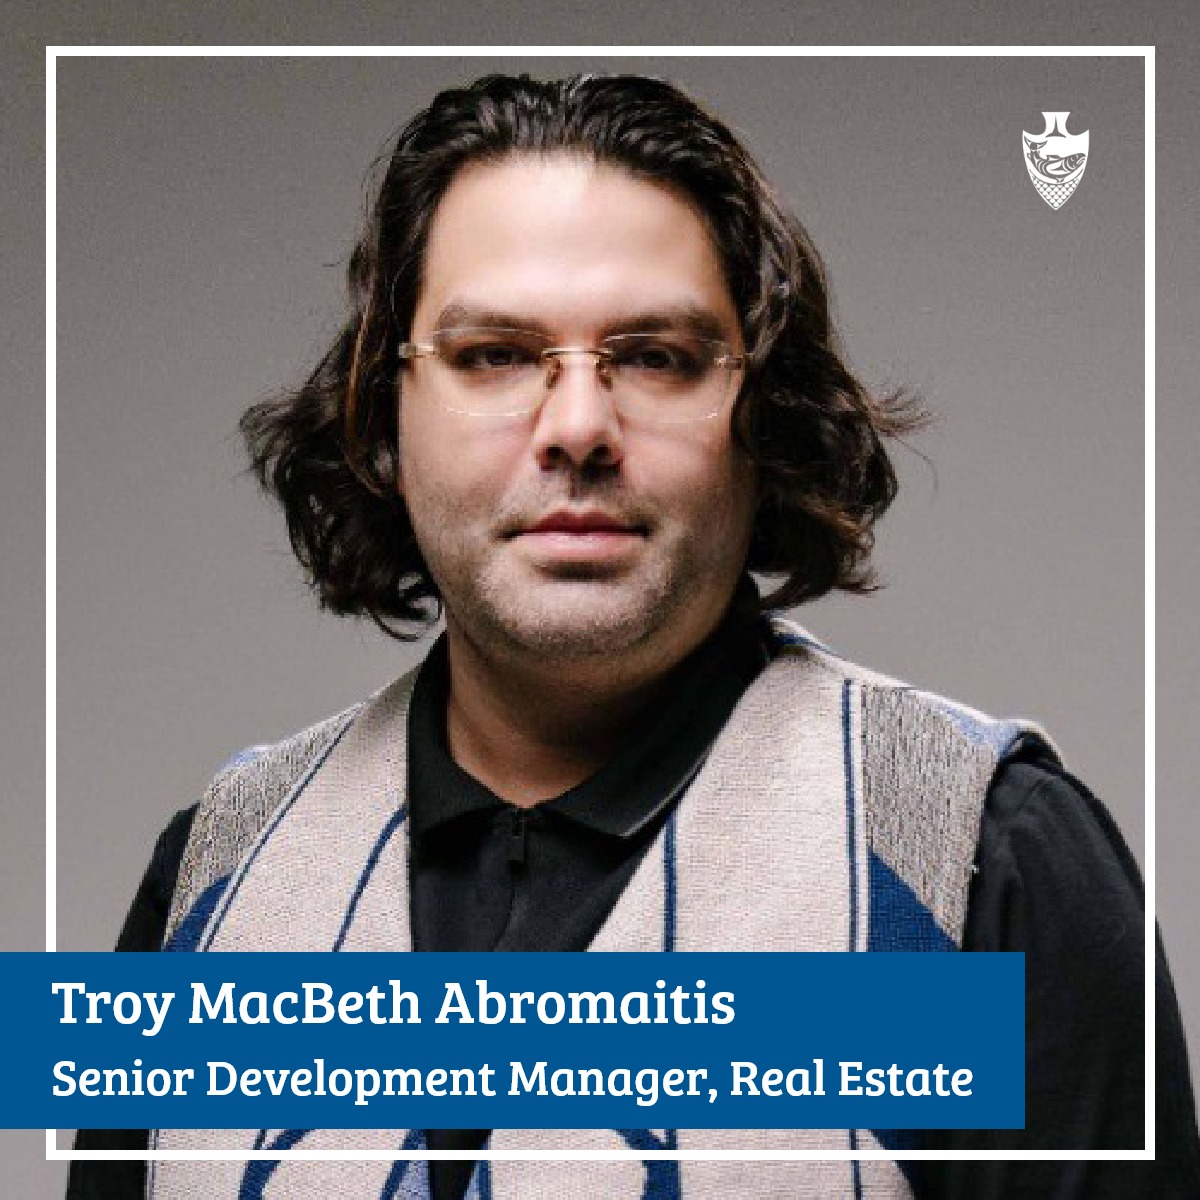 Musqueam Capital is pleased to announce that Troy Abromaitis has joined our team as Senior Development Manager. Troy brings significant experience in real estate development and joins us in our work for the Musqueam community and creating a lasting legacy. See more about Troy in the link in bio.